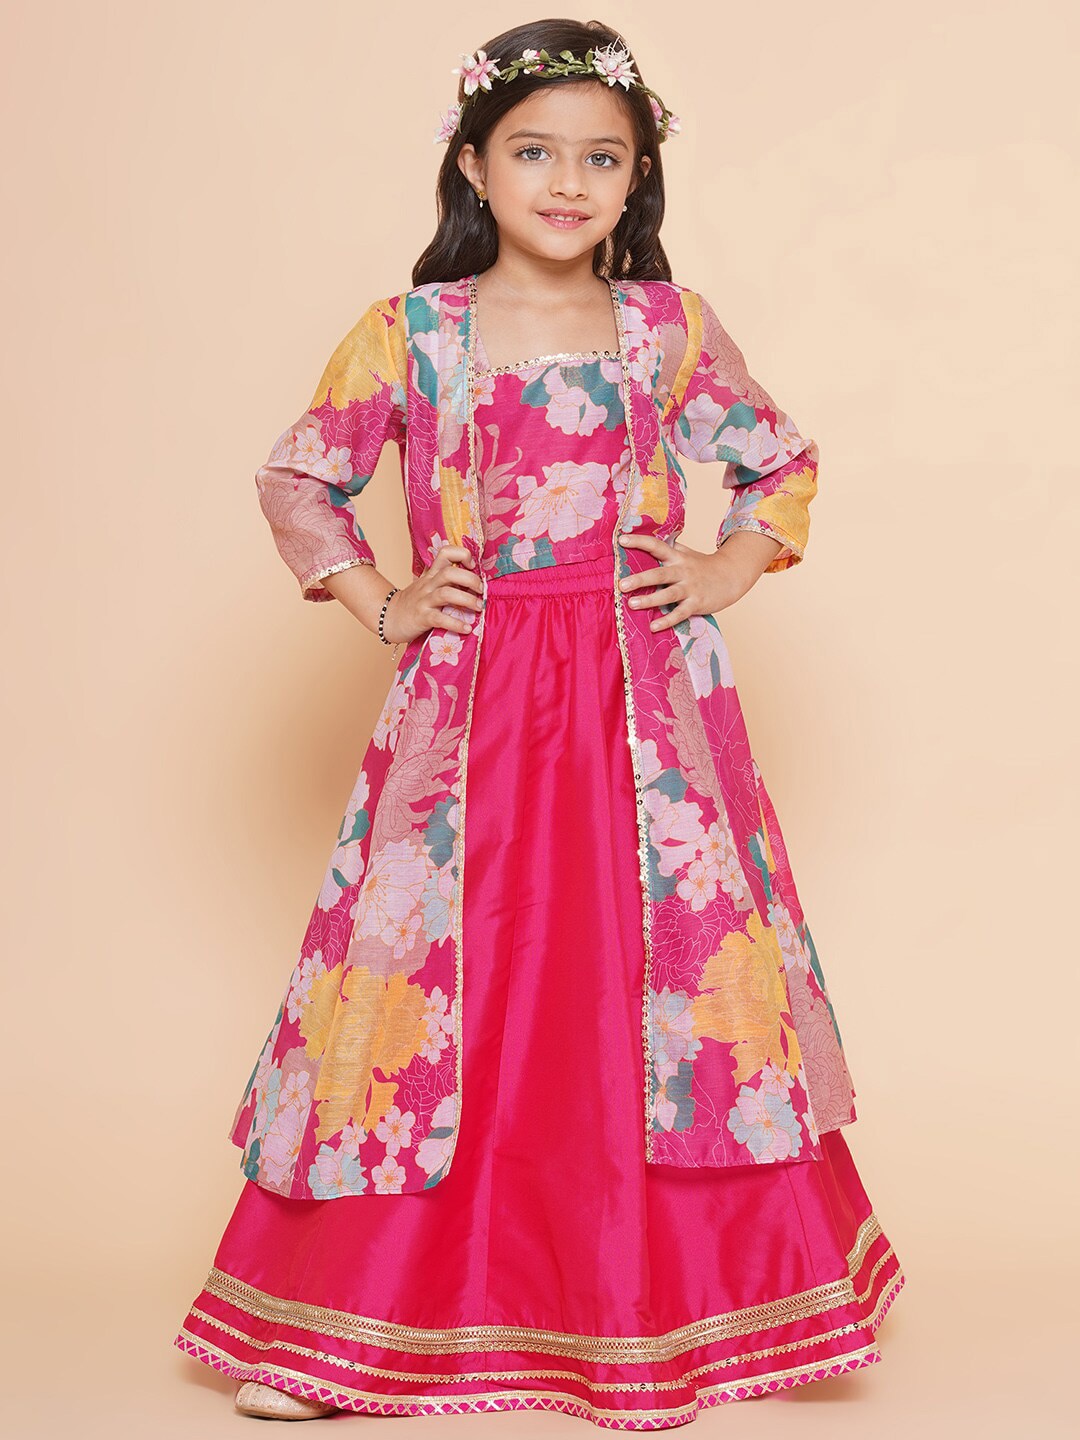 Bitiya by Bhama Girls Floral Printed Ready to Wear Lehenga & Blouse With Shrug Price in India